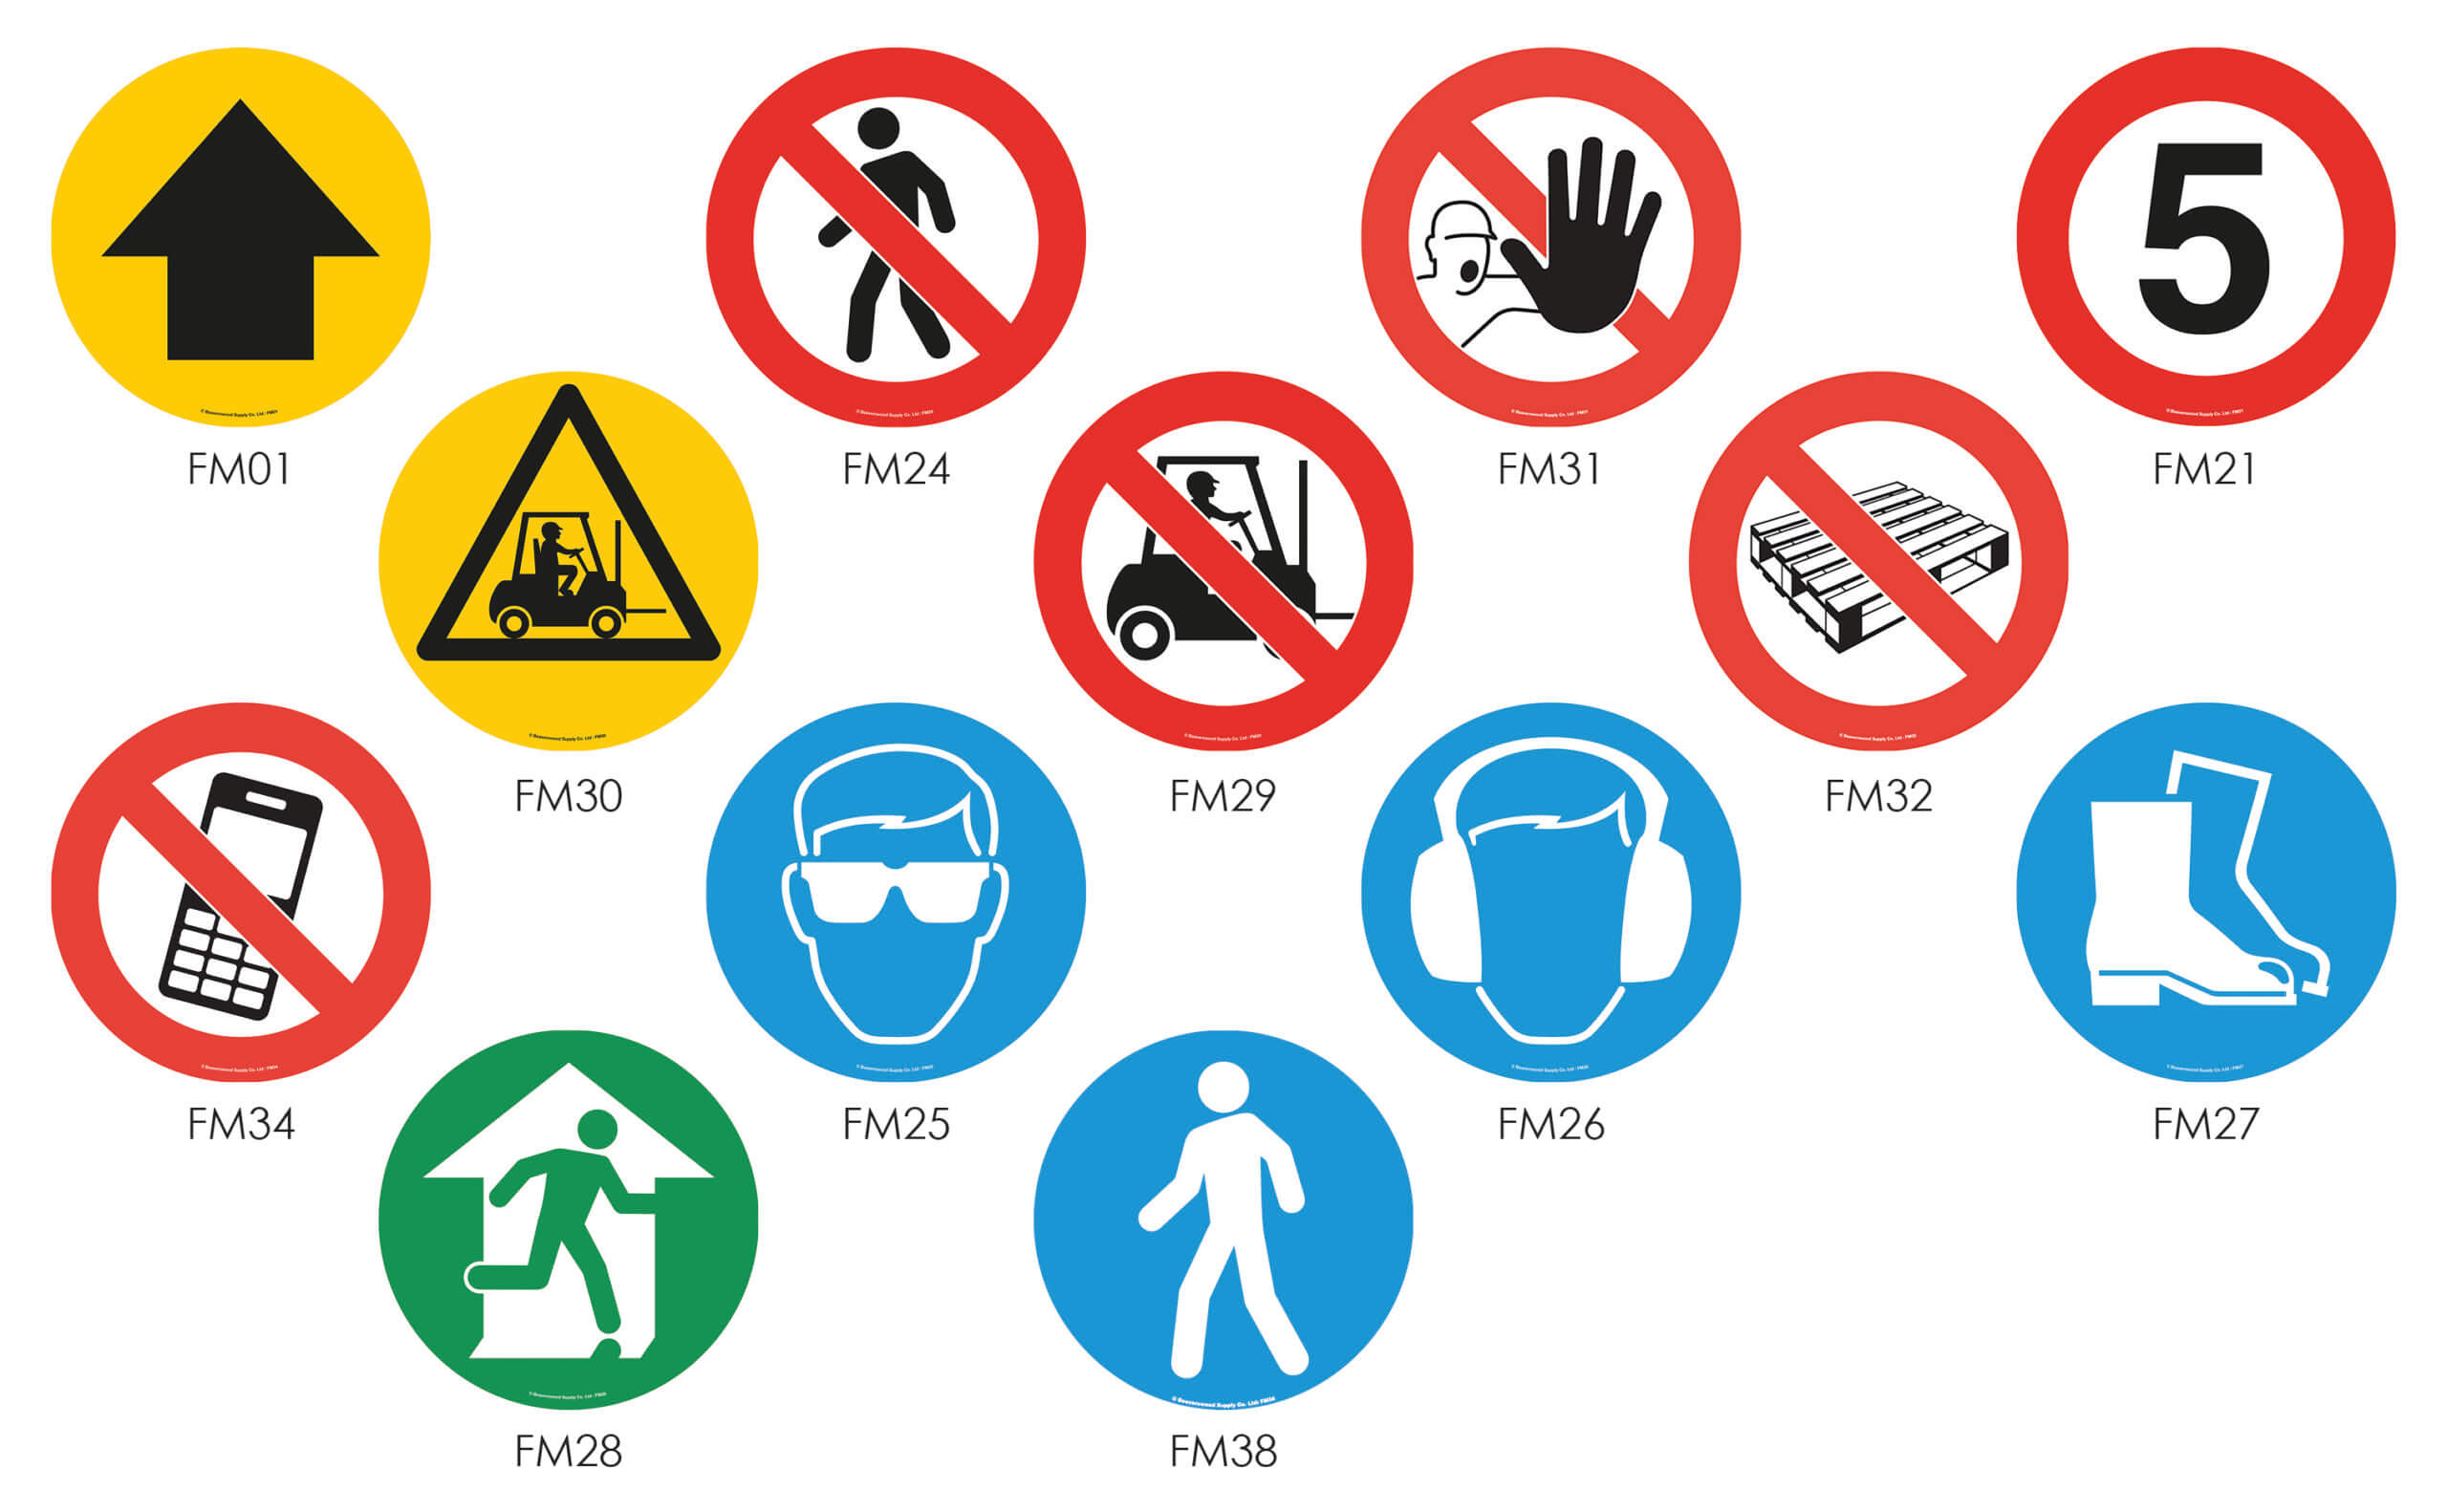 Graphic Floor Markers and Safety Signs - symbols, no text